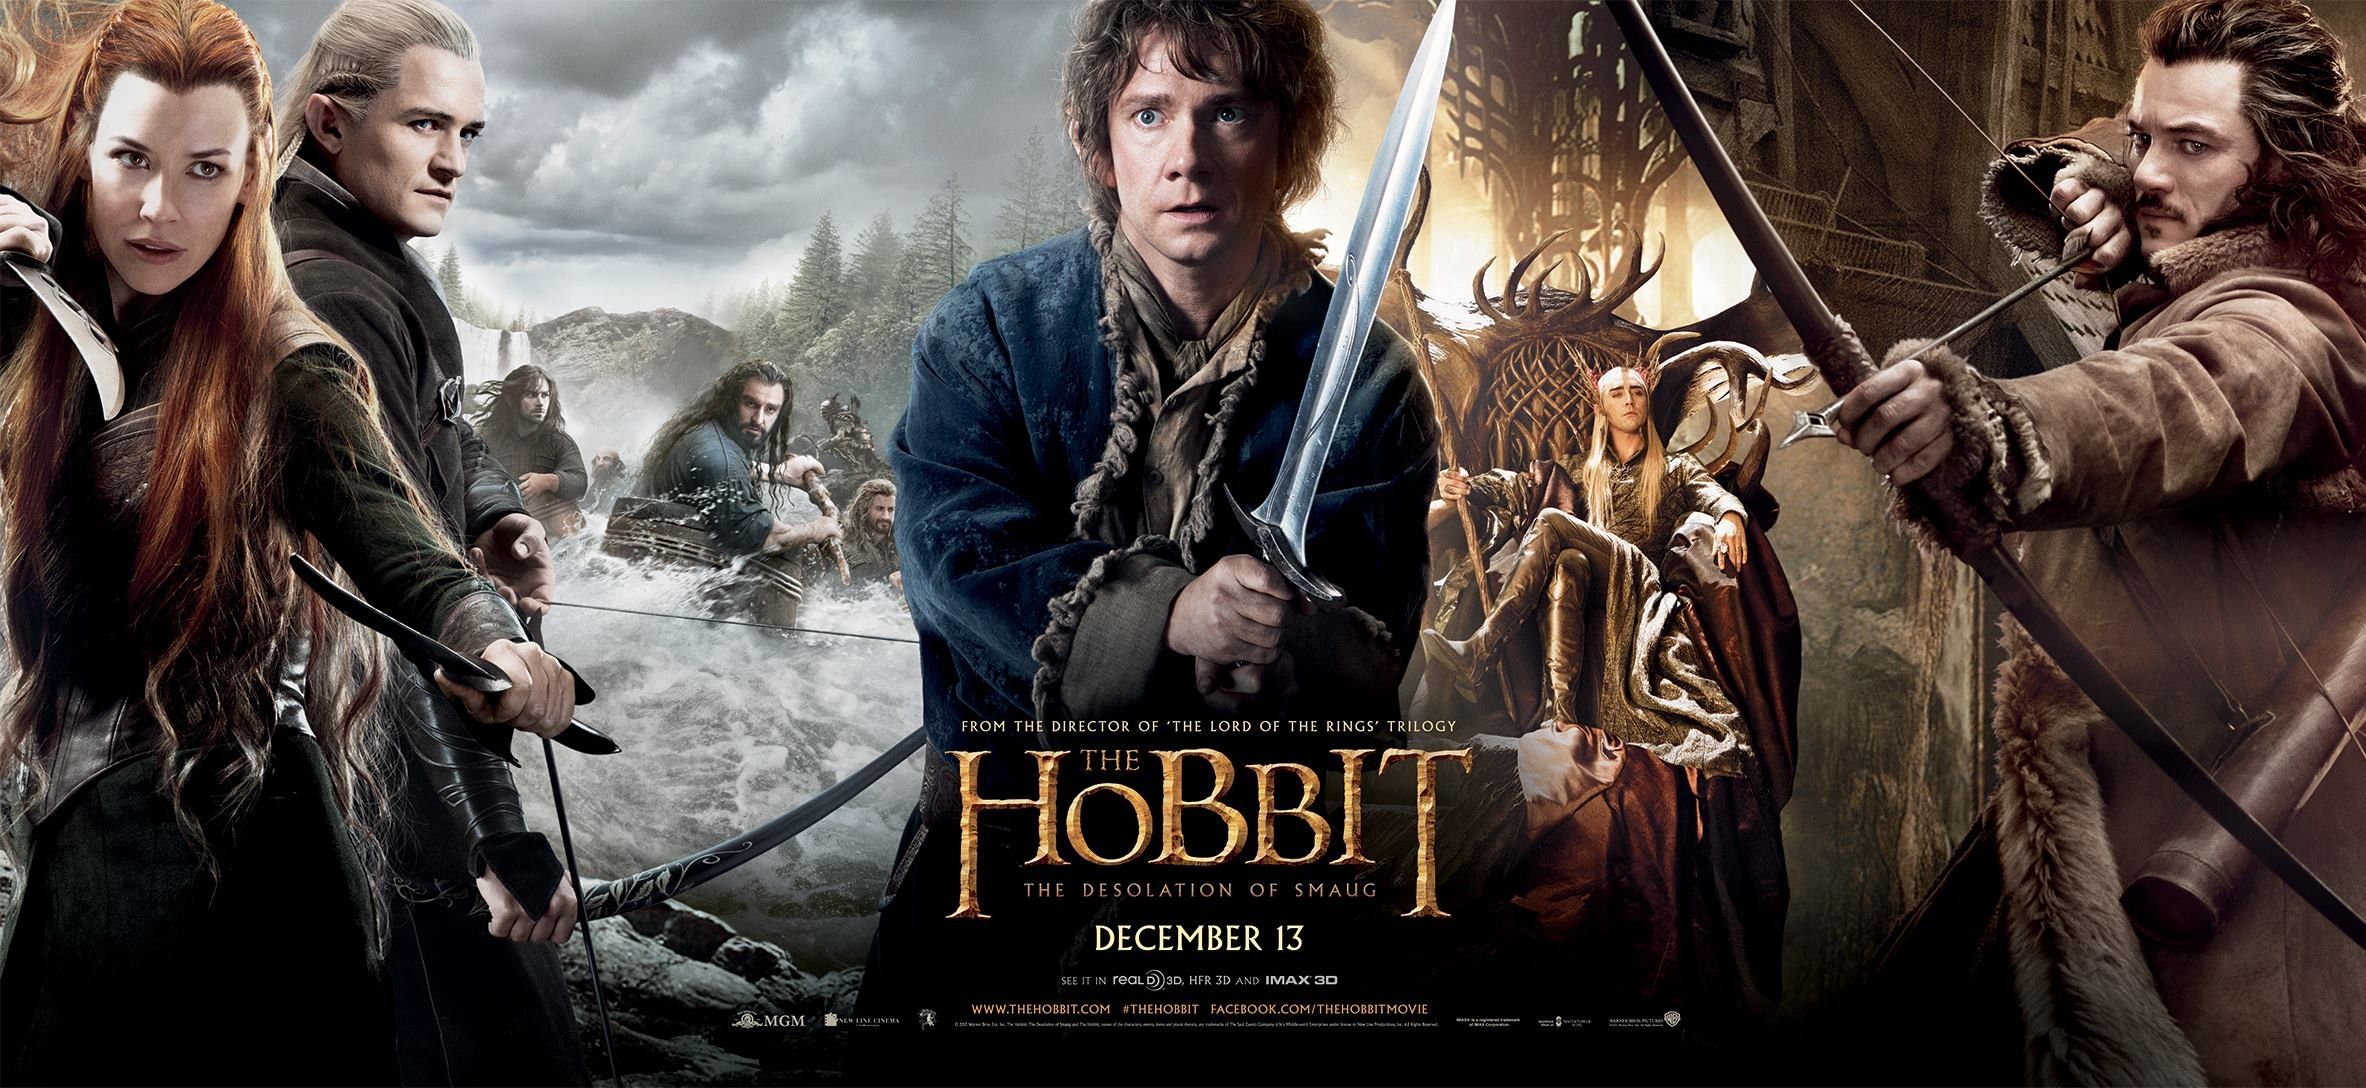 The Hobbit: The Desolation of Smaug Triptych Poster